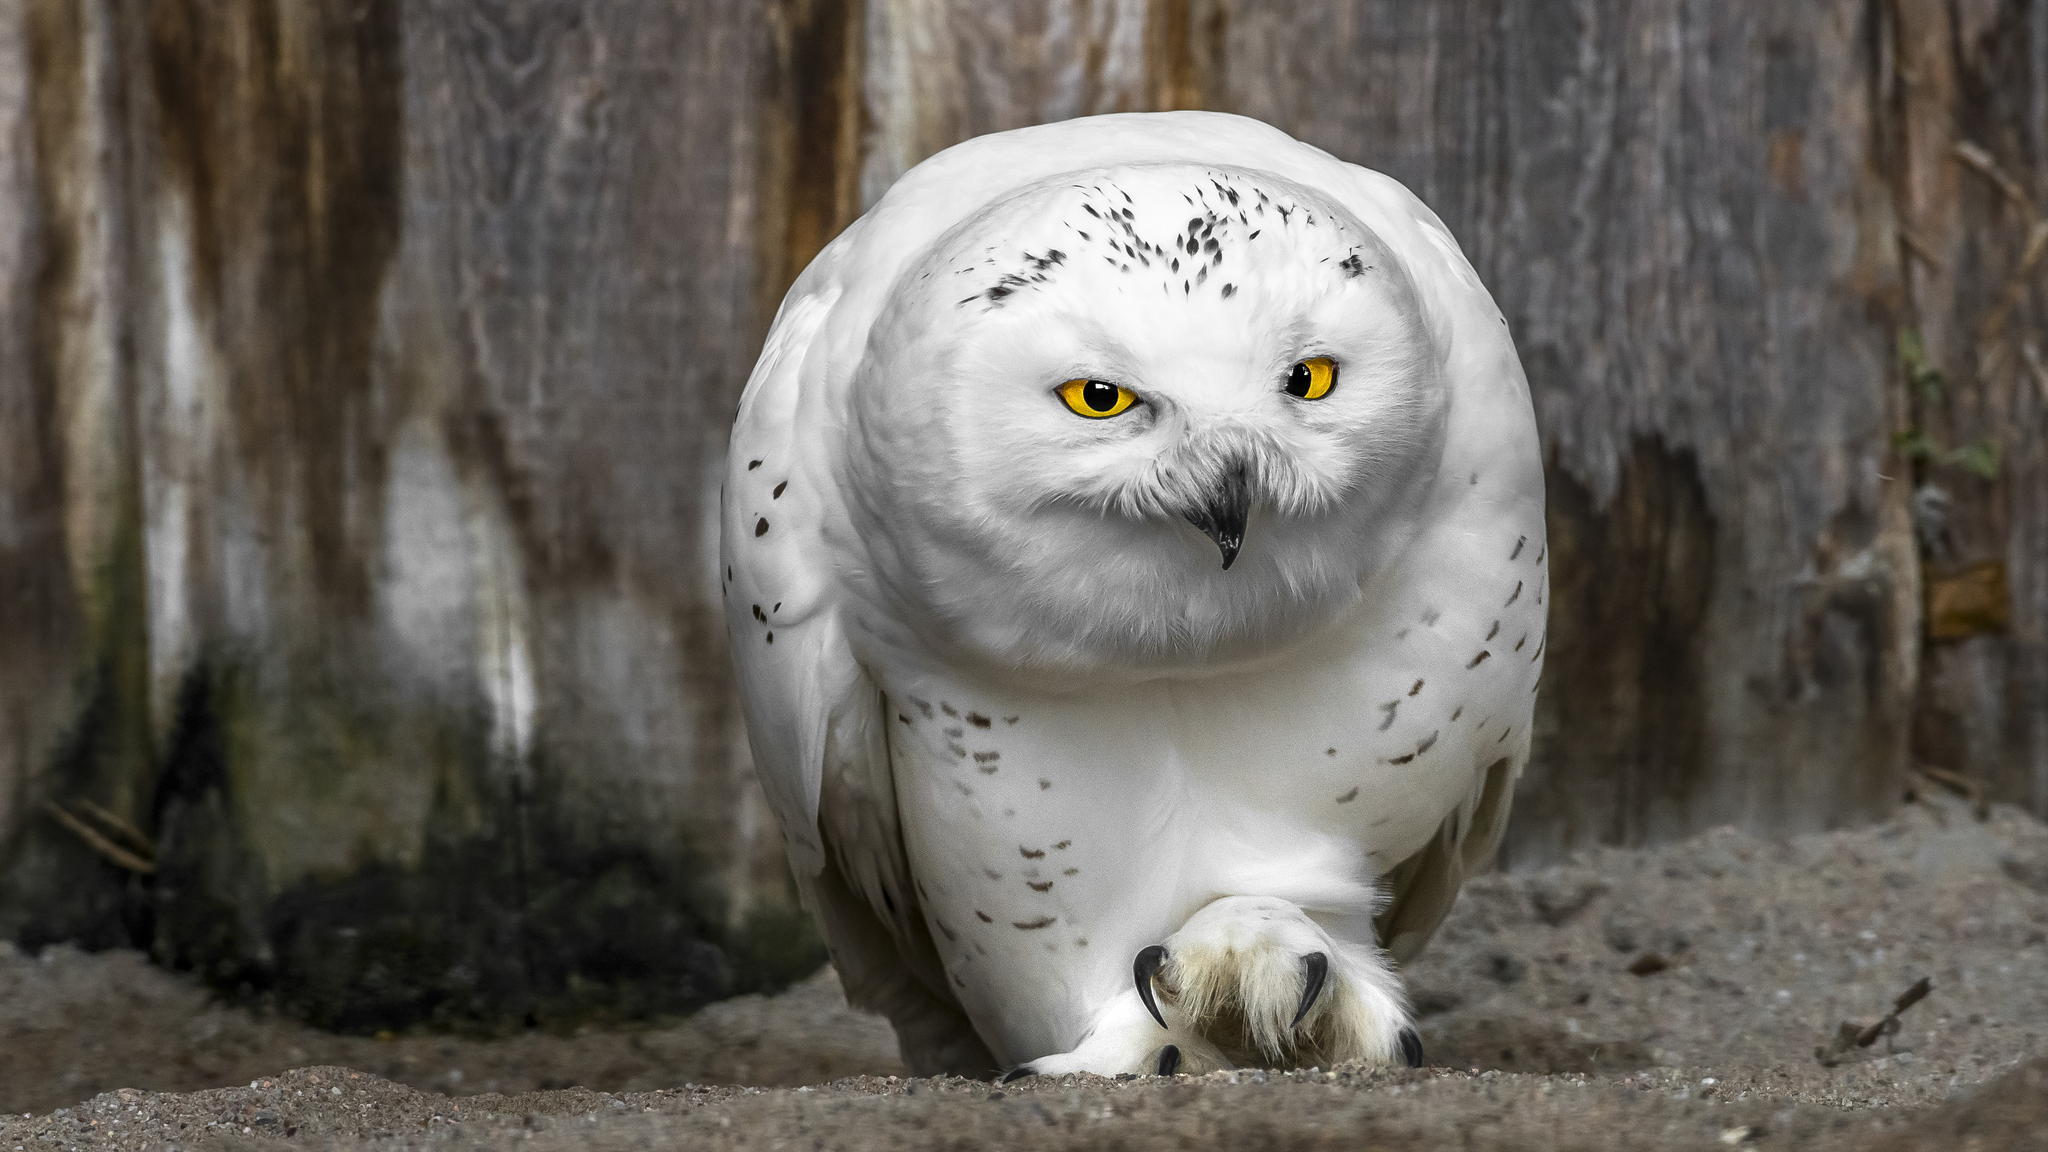 White Owl Images & galleries